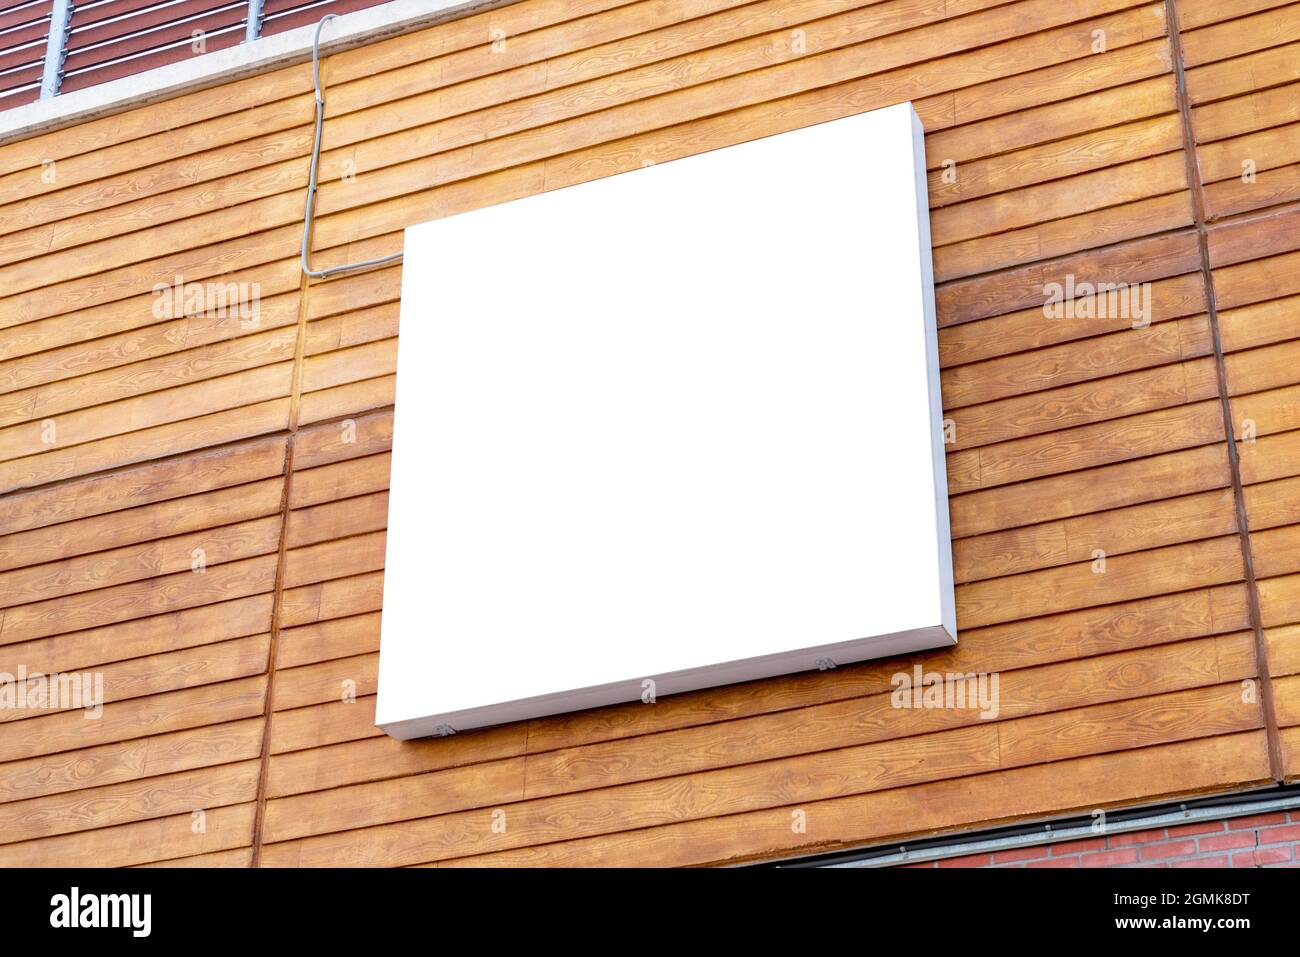 Square billboard mockup on wooden building wall Stock Photo